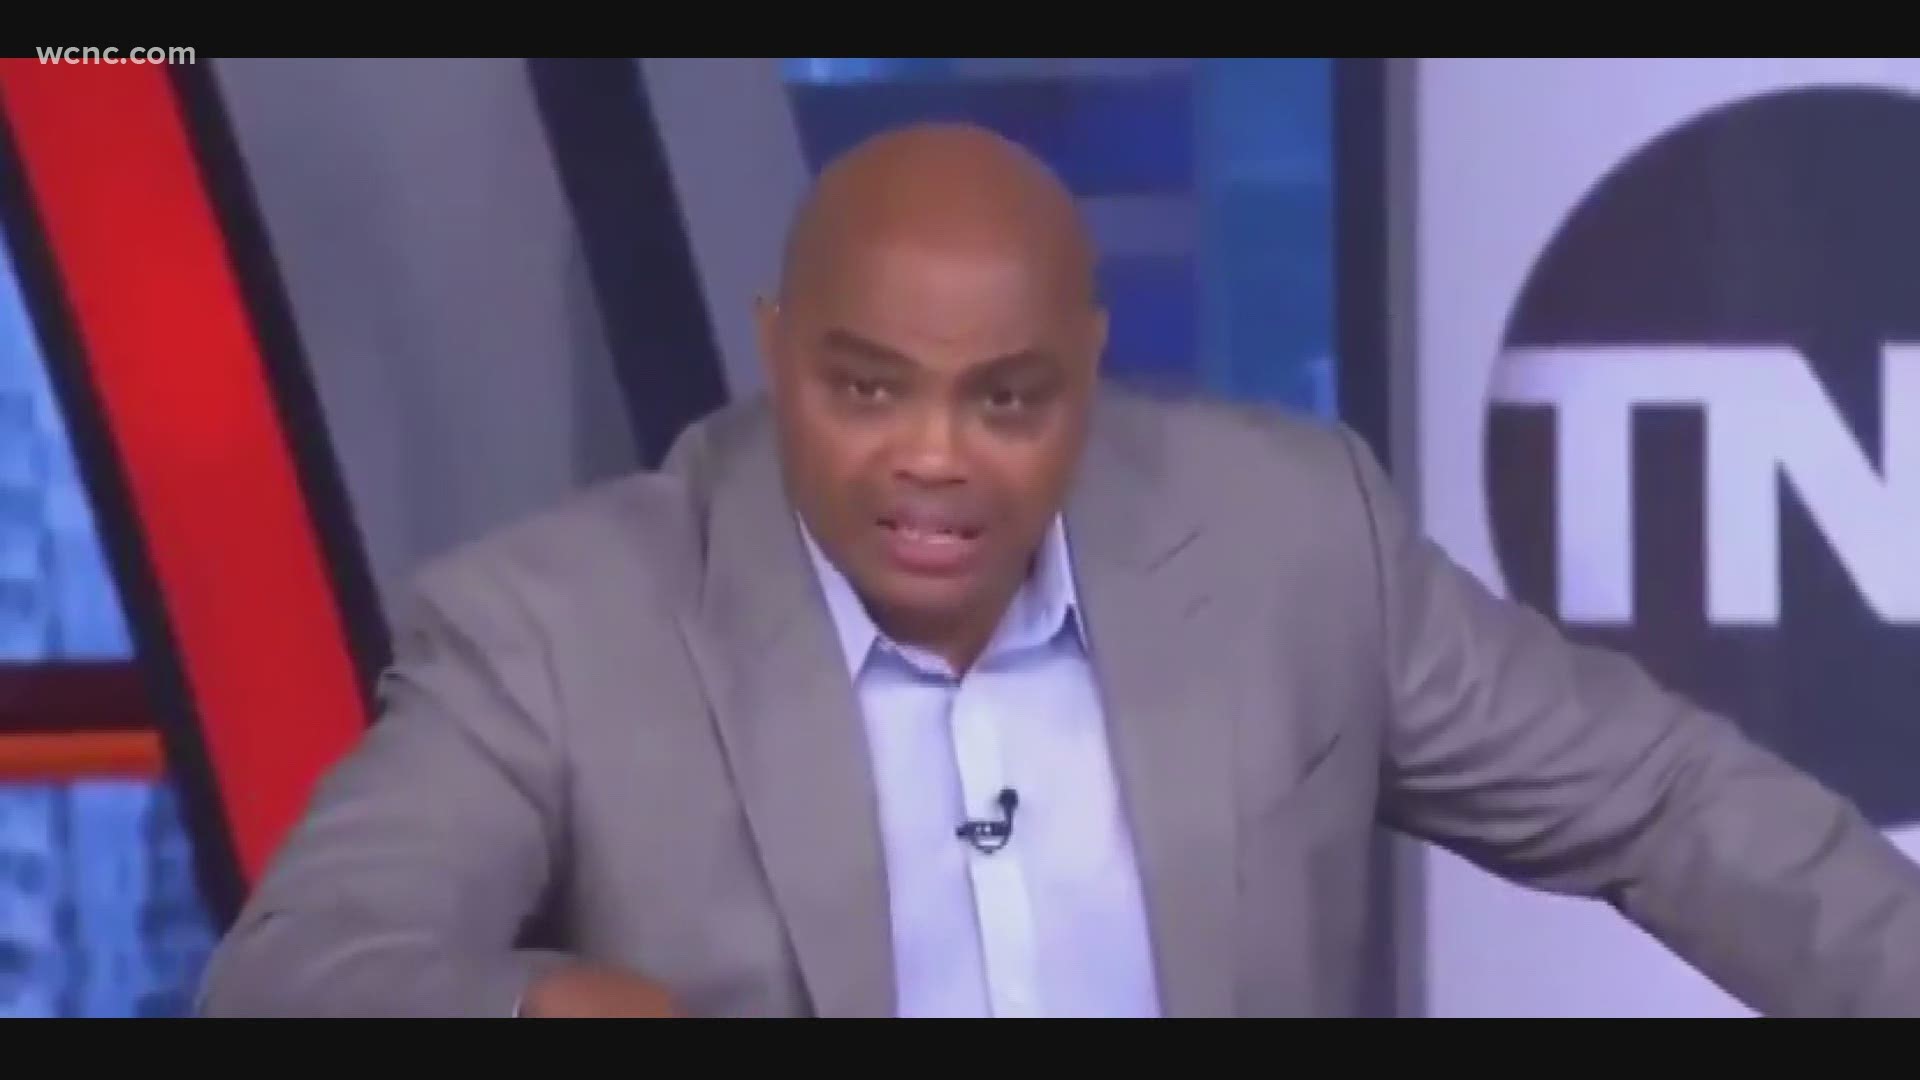 NBA legend Charles Barkley is facing criticism after he said professional athletes should get "preferential treatment" of the COVID-19 vaccine due to taxes paid.